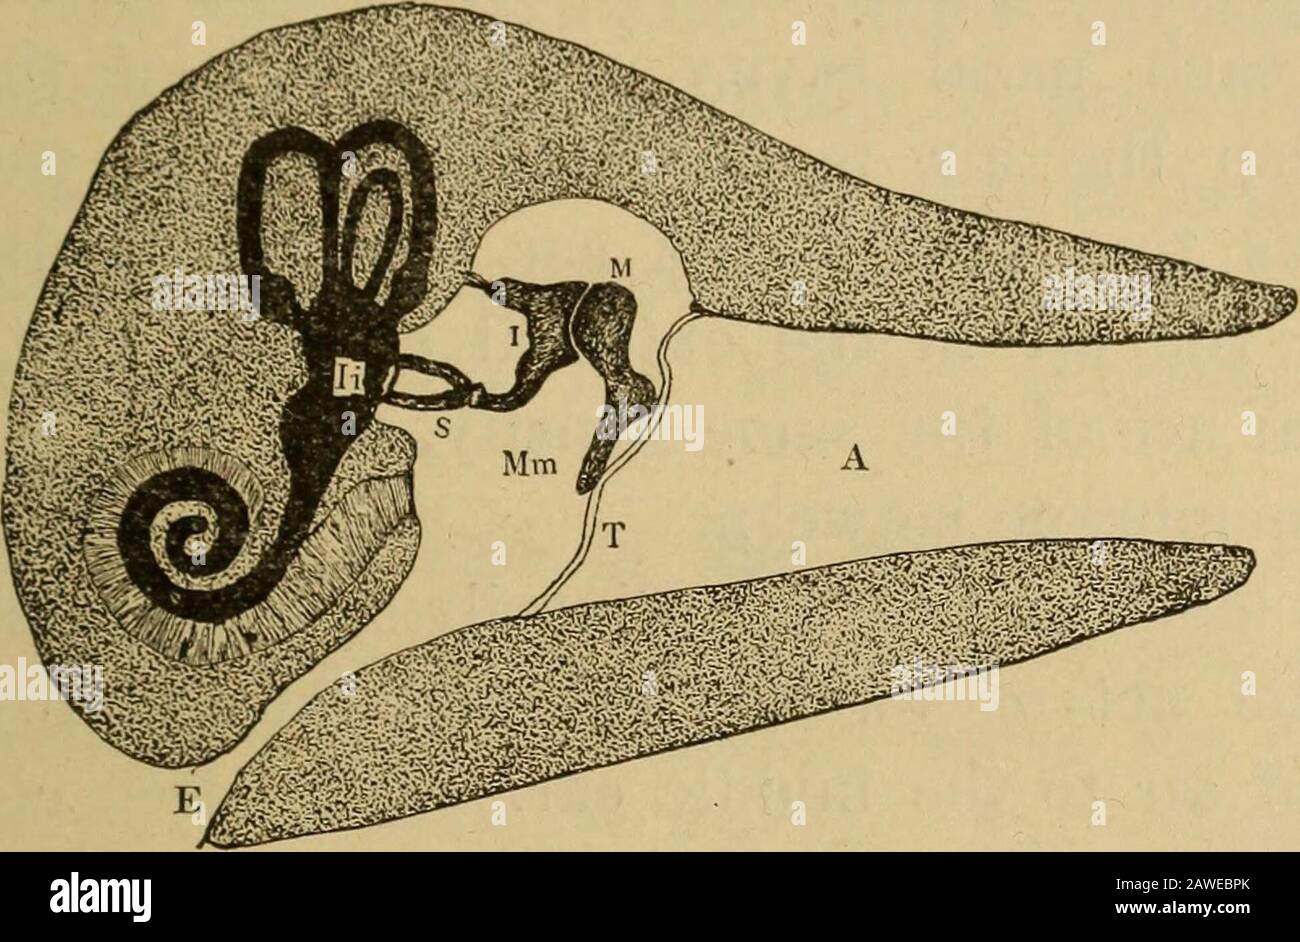 The essentials of healthA text-book of anatomy, physiology, hygiene, alcohol, and narcotics . Fig. 112. The three bones of the middleear: H, the hammer, or malleus; a, the an-vil, or incus; s, the stirrup, or stapes. THE SENSE OF HEARING. 319 the stirrup ; thus a chain of bones is established fromthe tympanic membrane across the cavity of the middleear. The outer end of this bony chain is attached to amembrane, and so is the inner end. Beneath the innermembrane, just opposite the stirrup, in the inner ear, is. Fig. 113. The middle and inner ears, from a different view and on alarger scale than Stock Photo